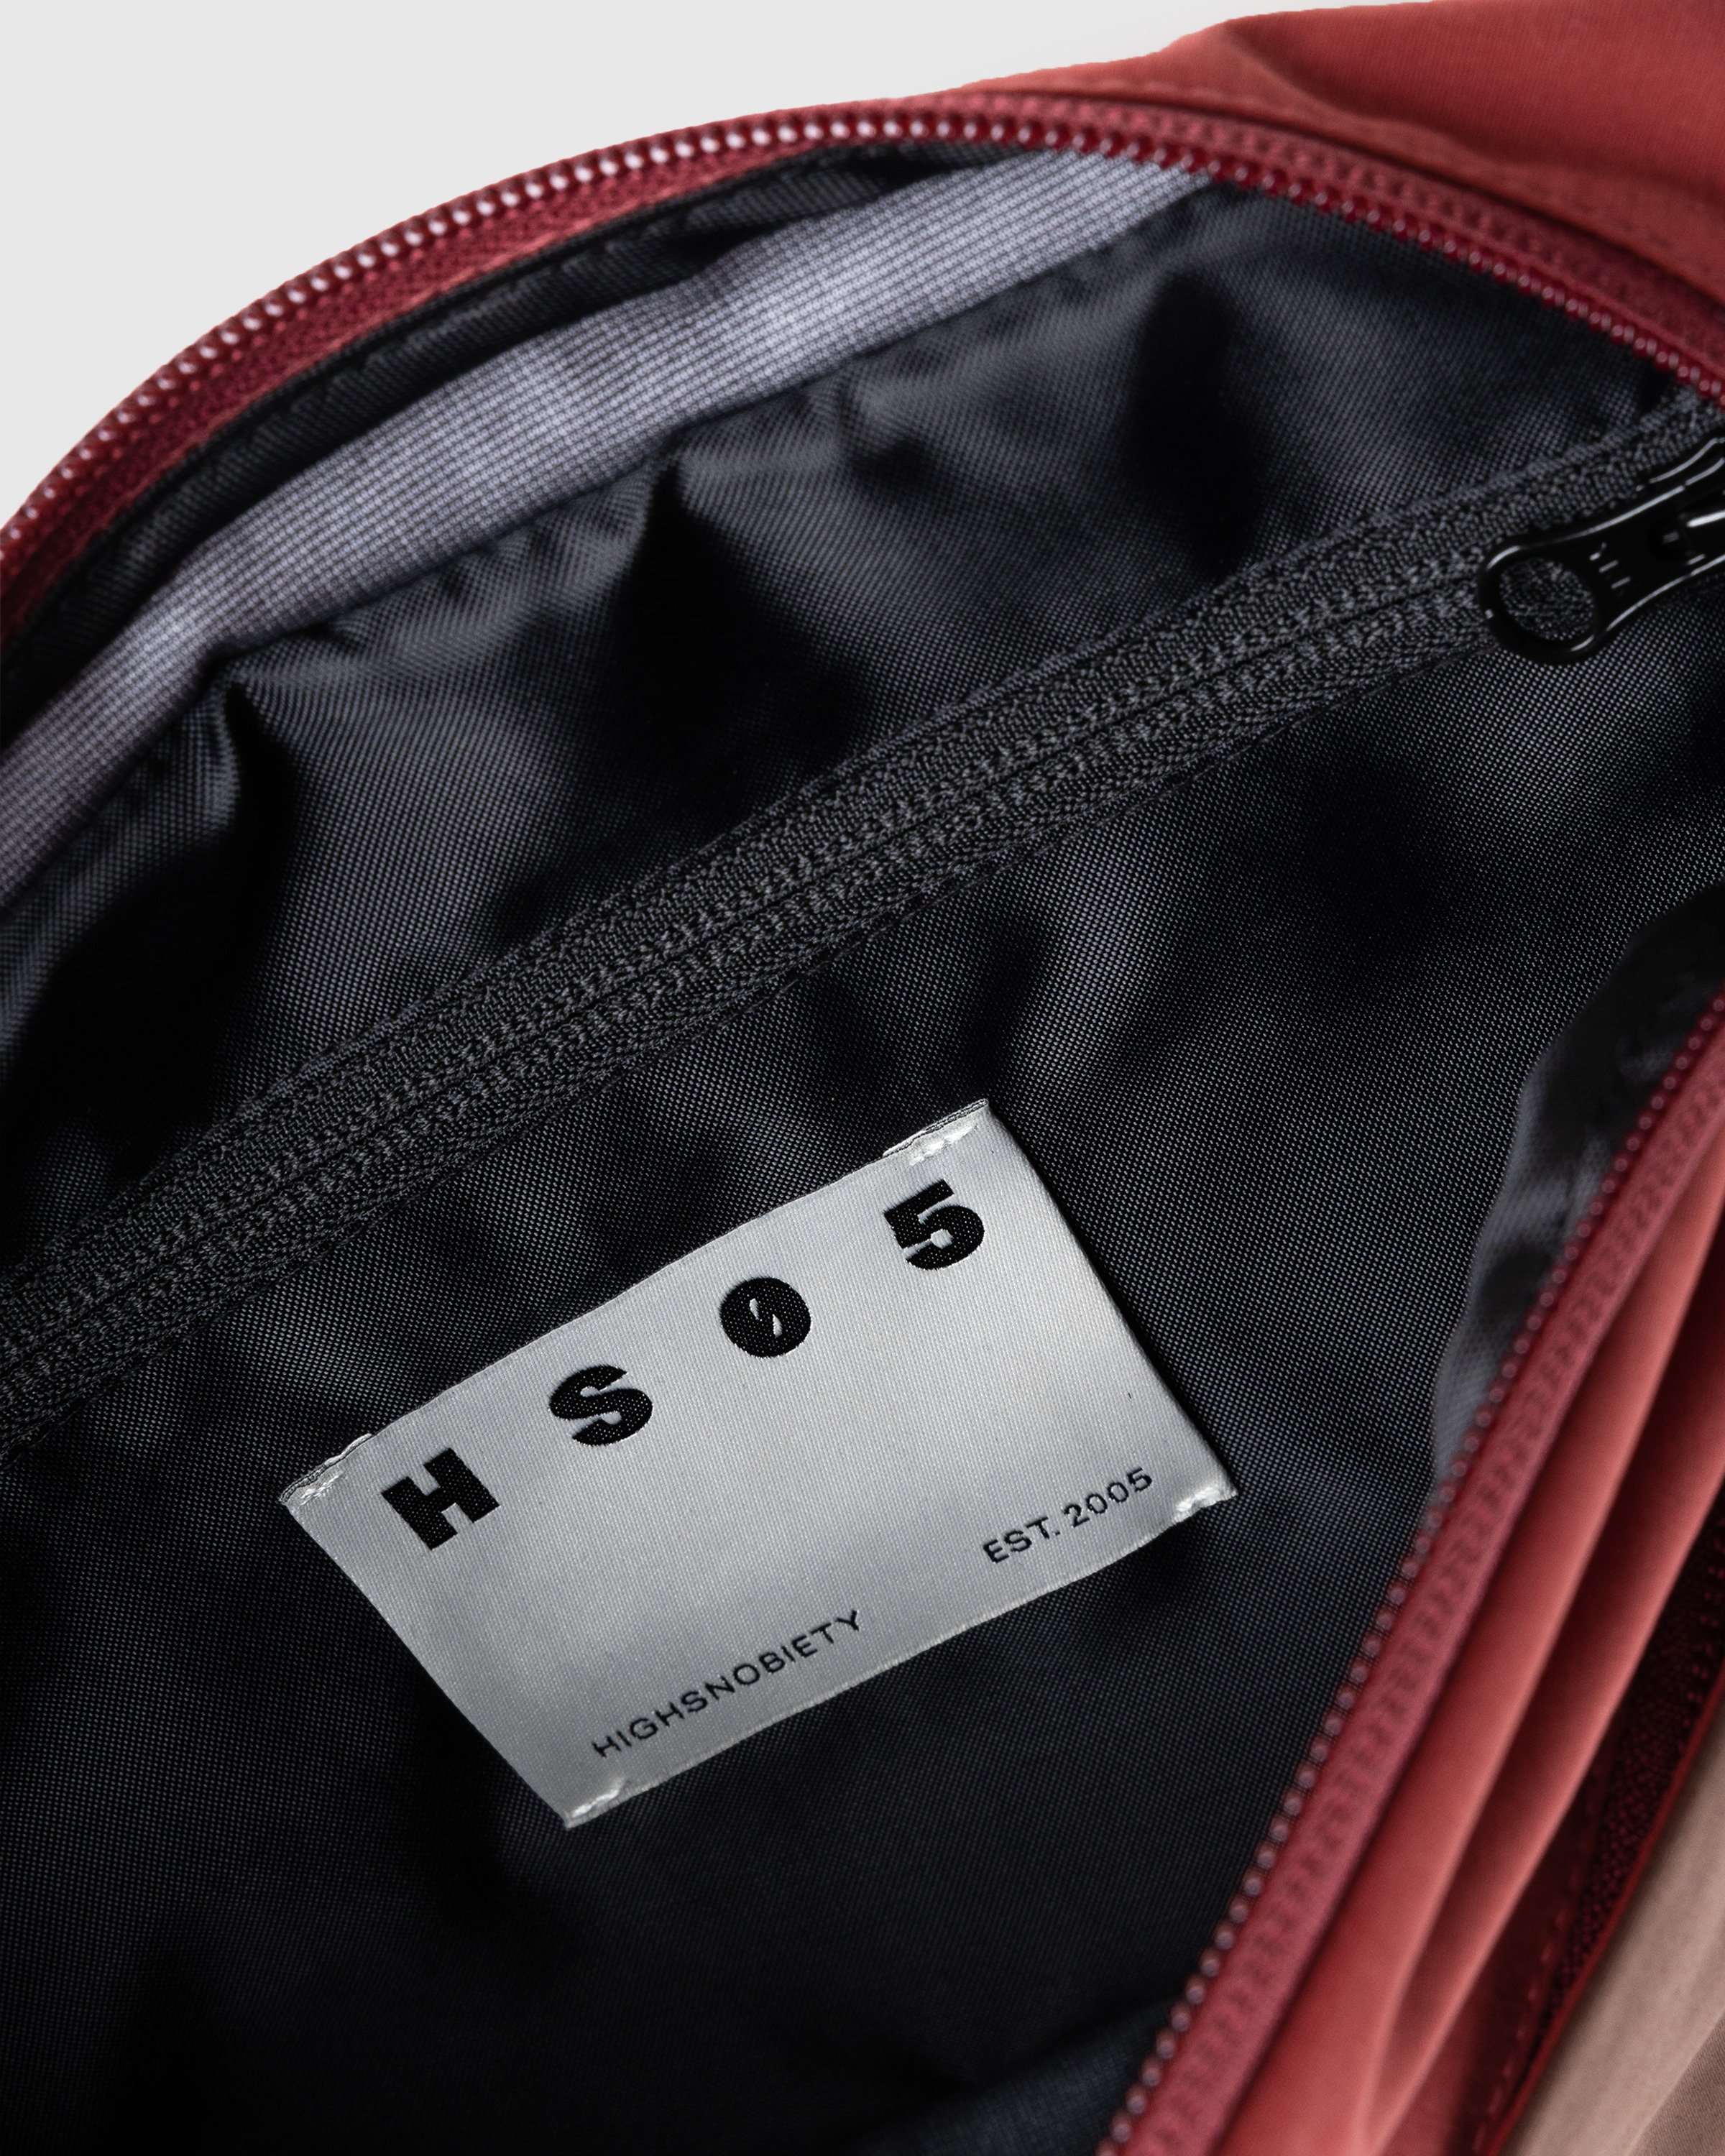 Highsnobiety HS05 - 3 Layer Nylon Side Bag Red - Accessories - Red - Image 6